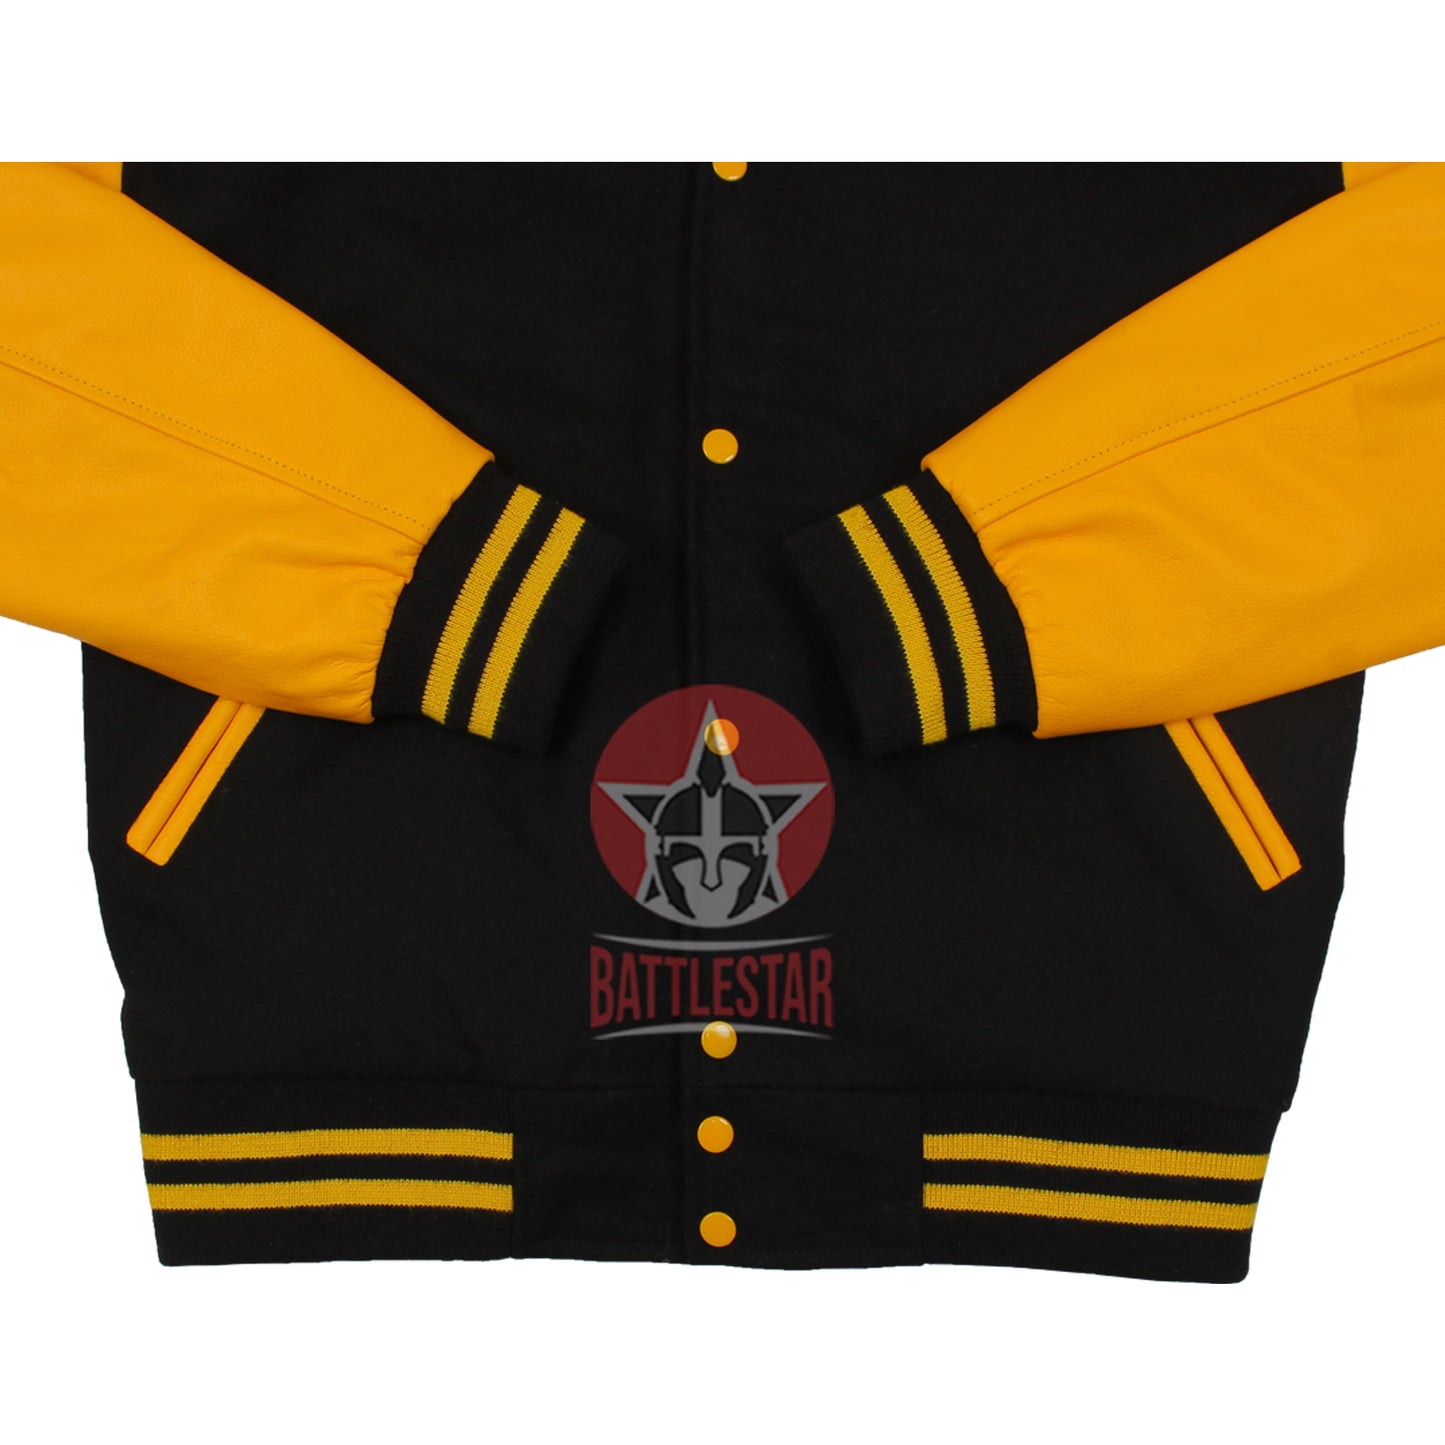 Year of the Tiger Embroidered Letterman Baseball Jacket